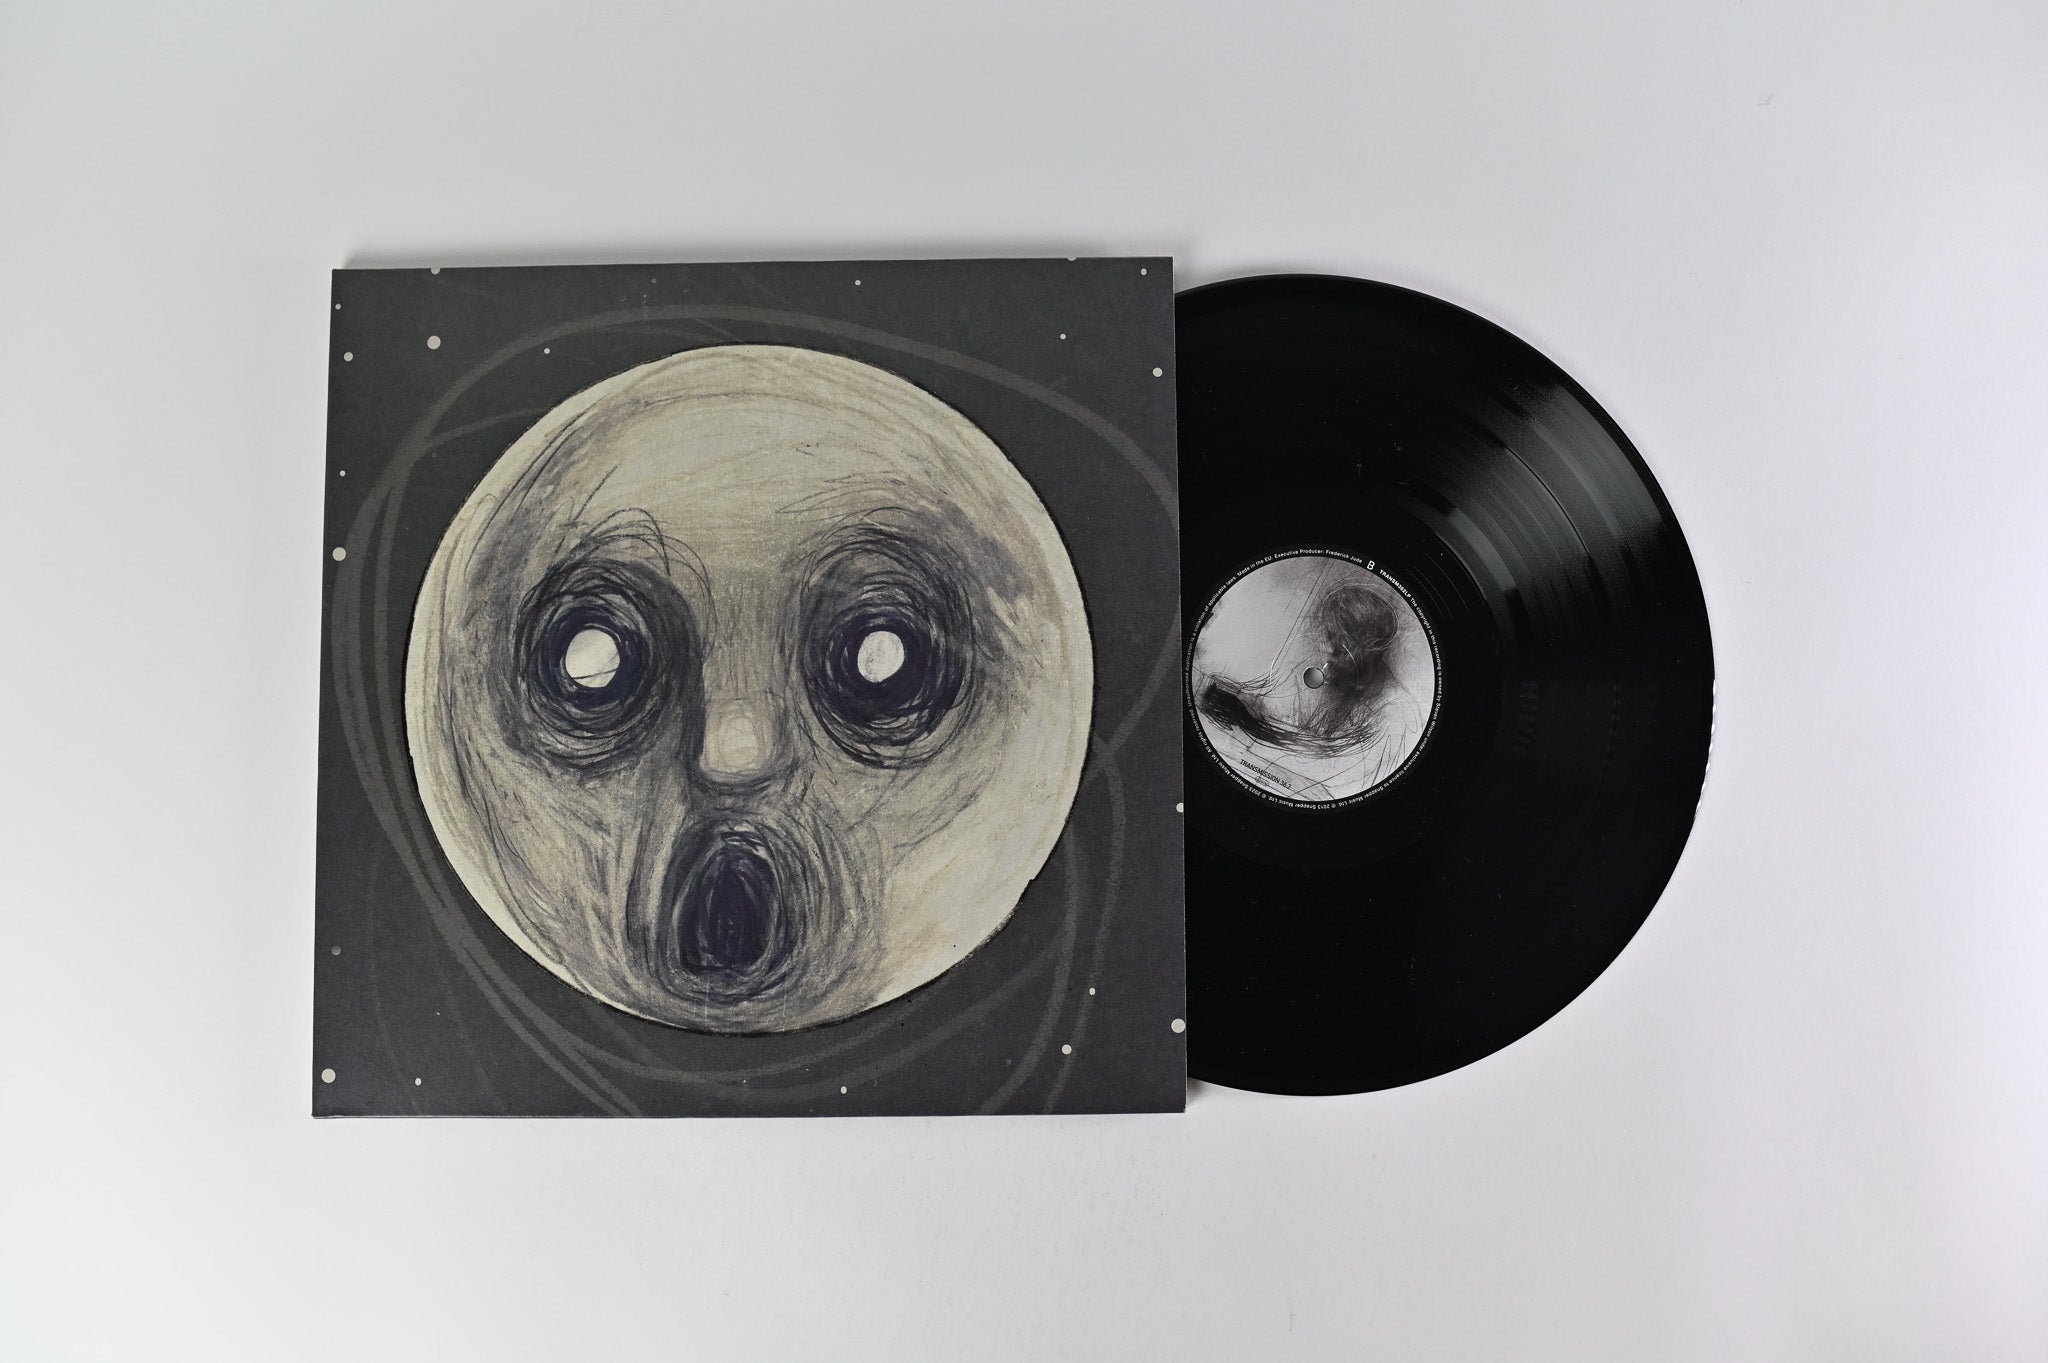 Steven Wilson - The Raven That Refused To Sing (And Other Stories) on Transmission Reissue